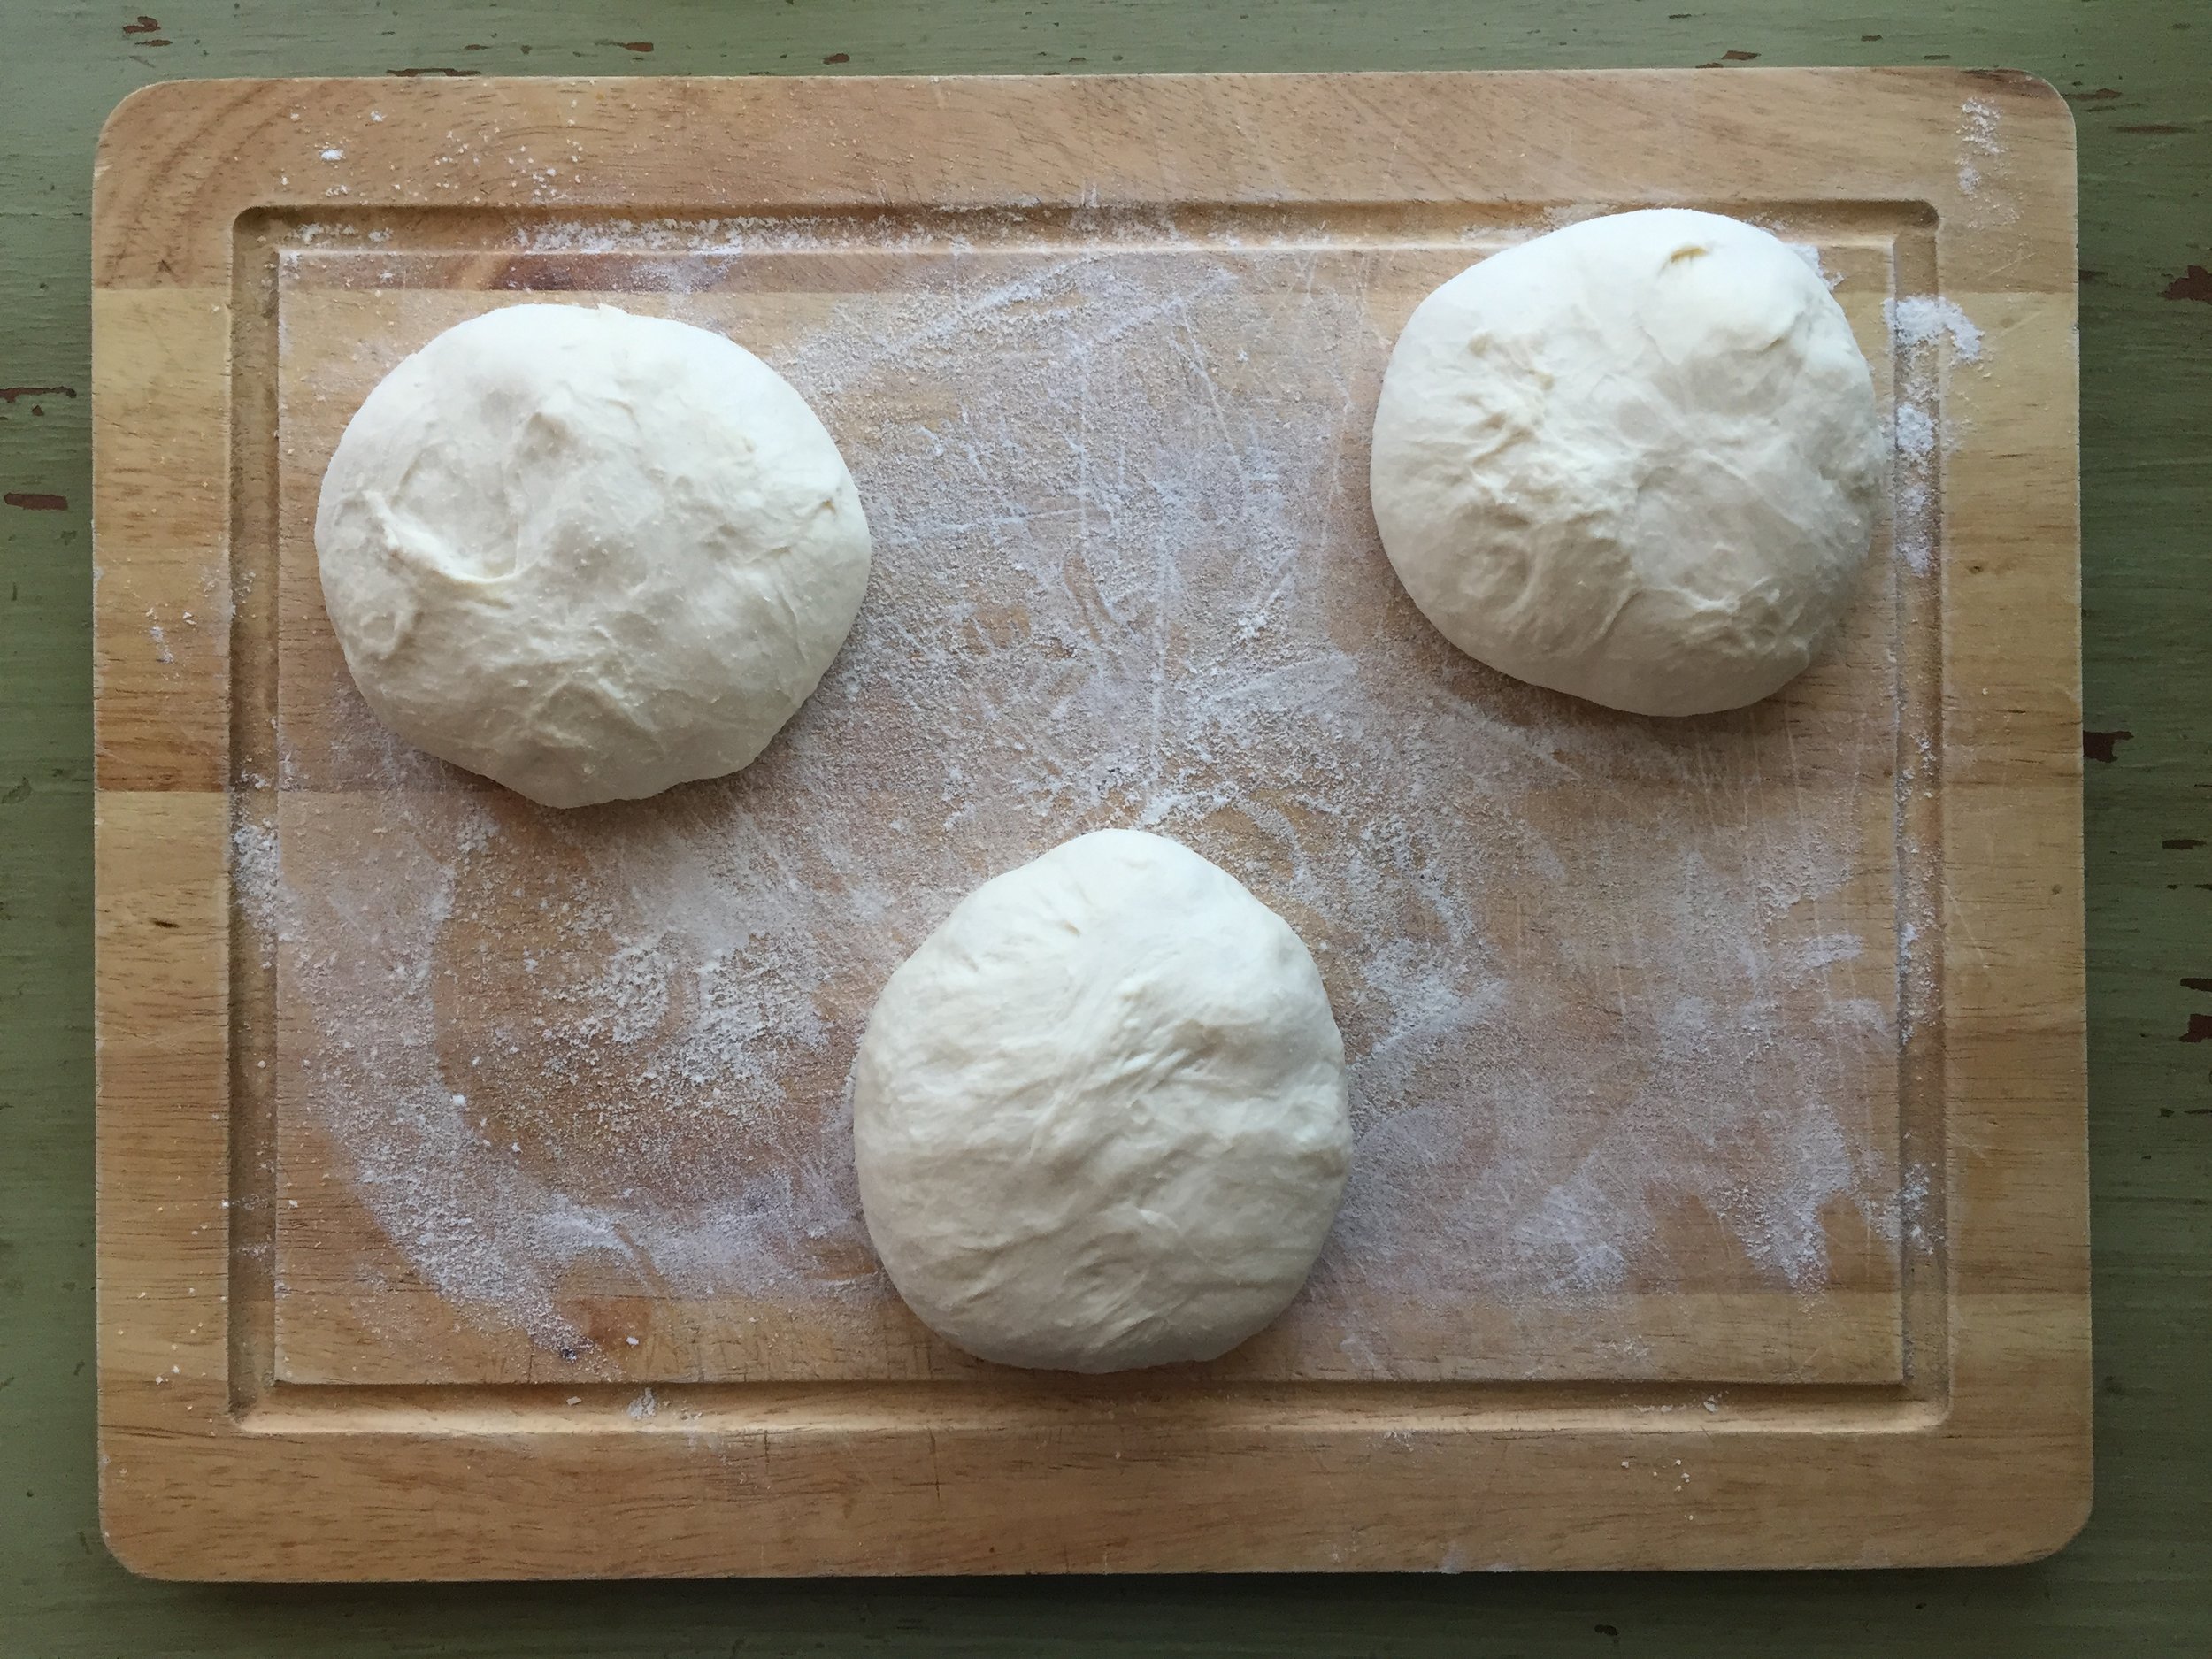  3 dough balls pre-shaped and resting while the oven heats up.  